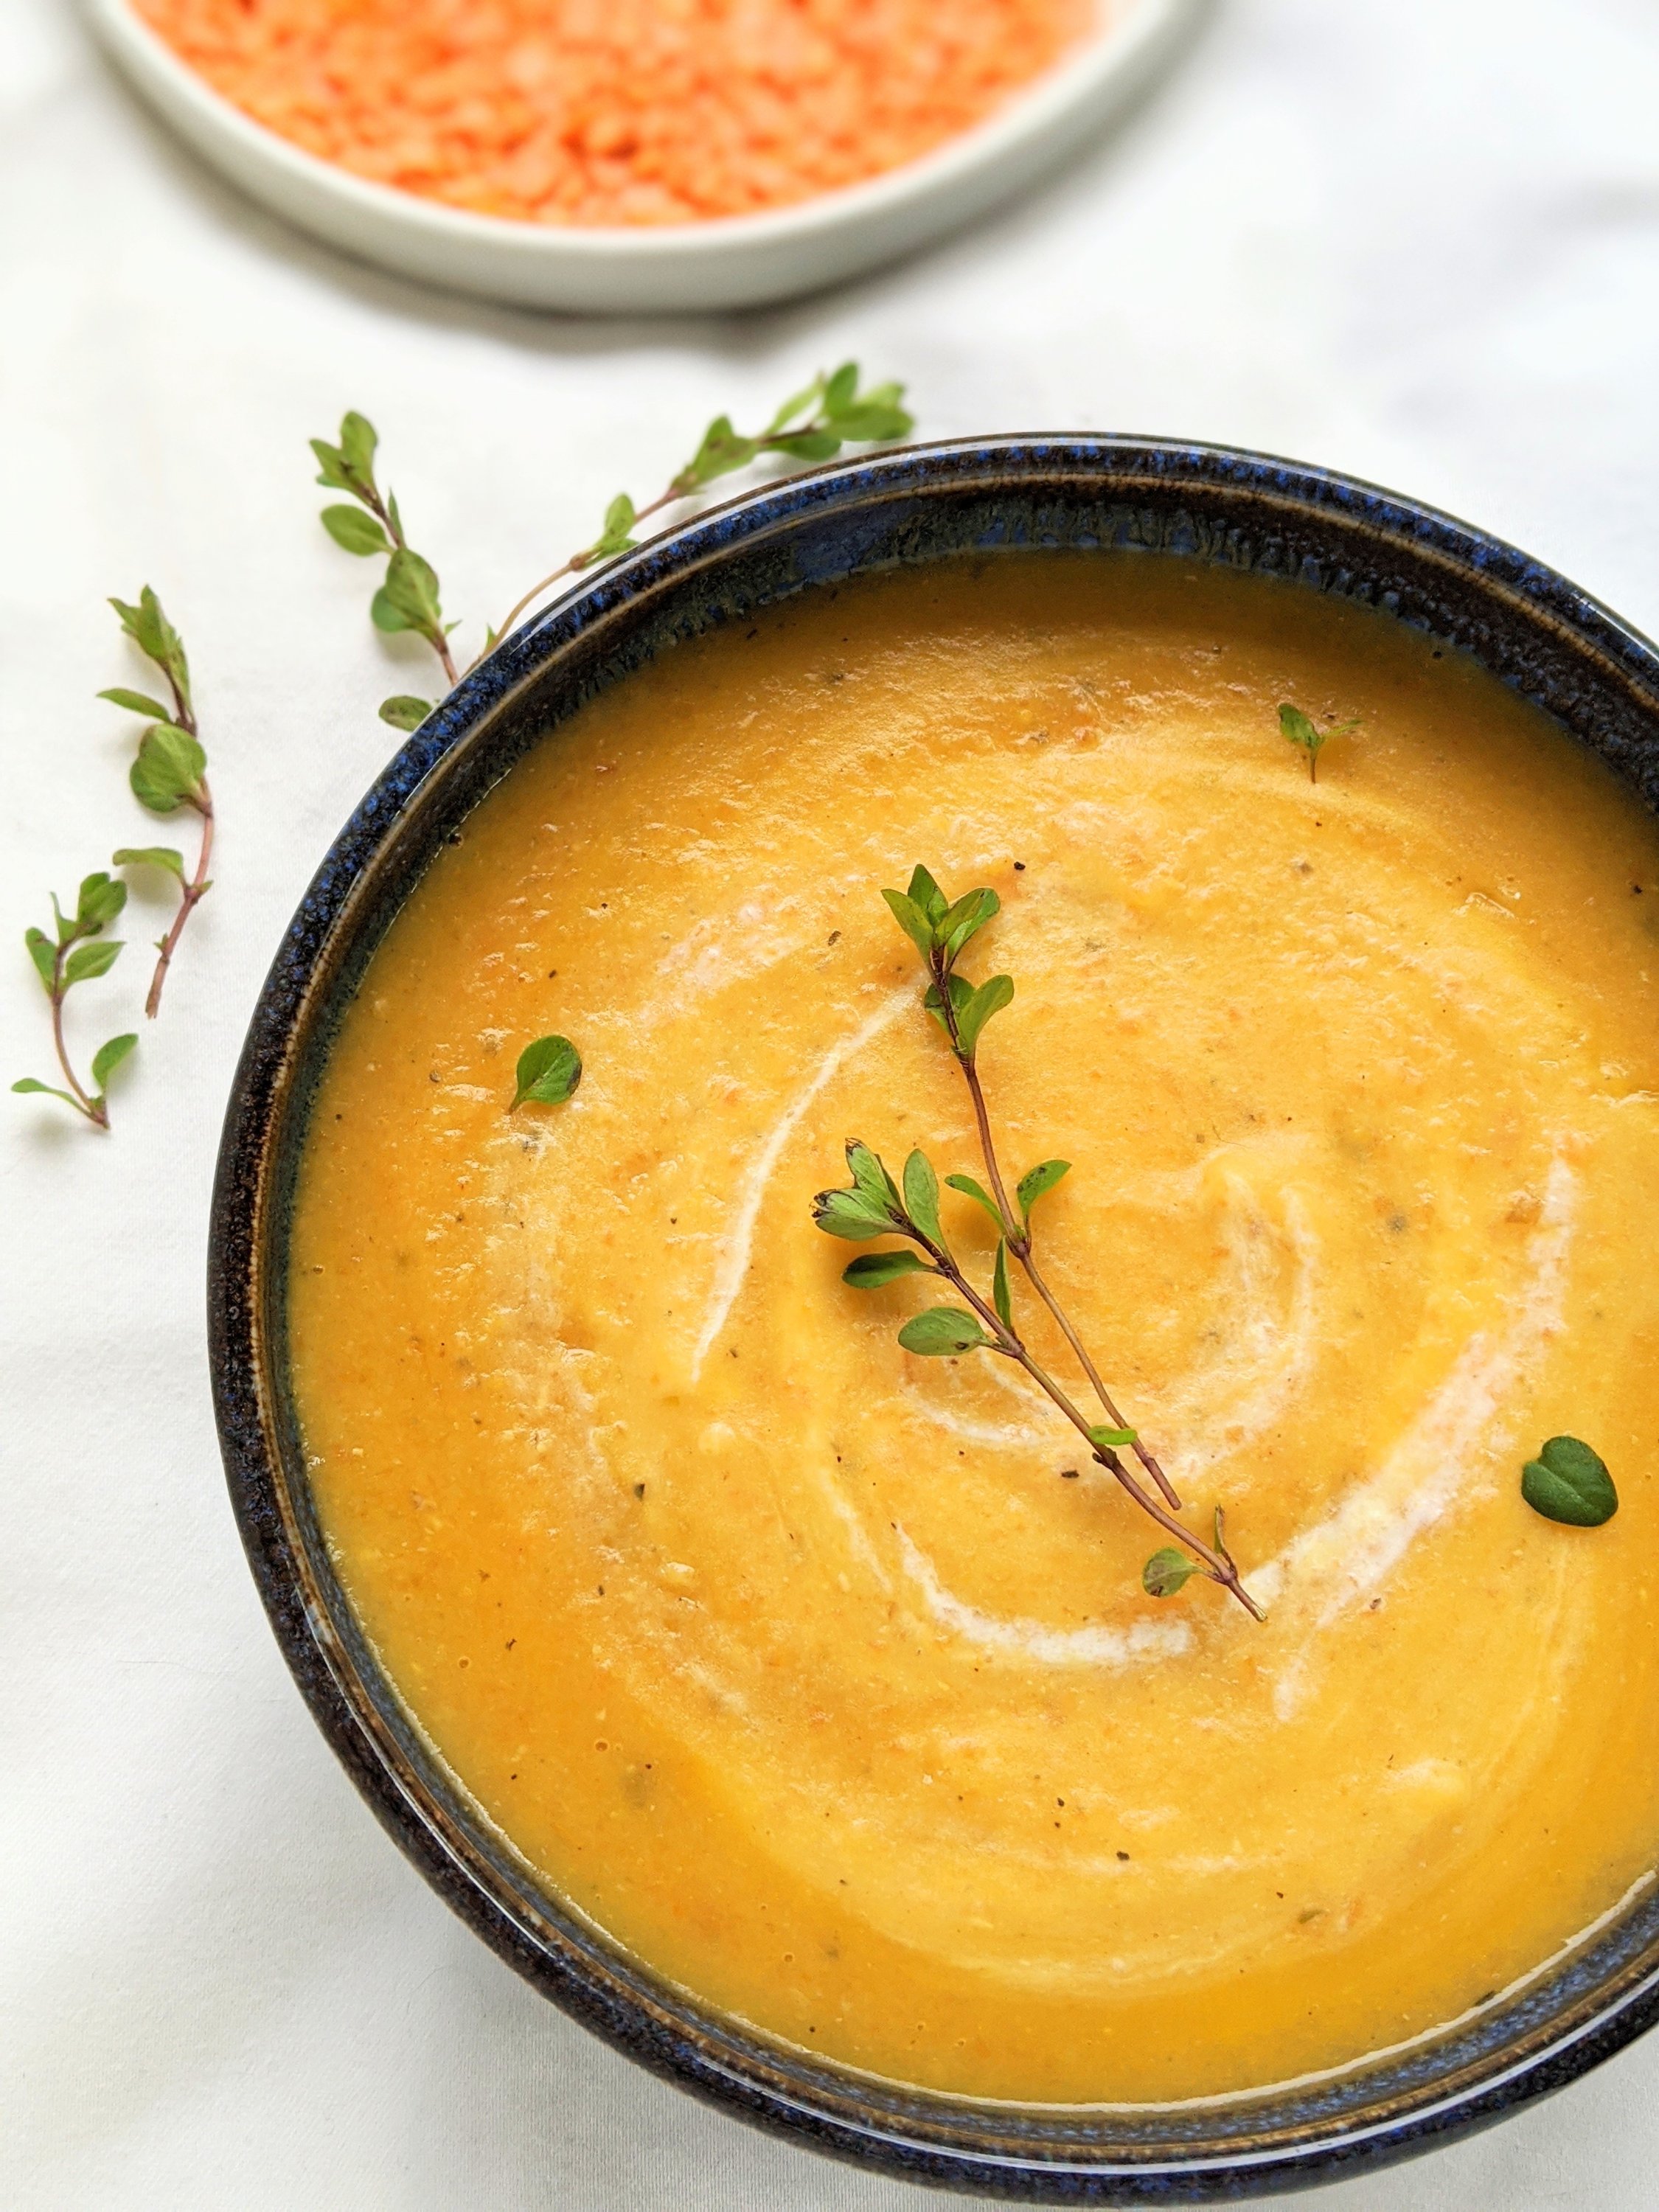 best vegan soup recipes for fall or dinner cozy vegan recipes the best soups for families kids or adults everyone will love meal prep lunches or dinners for the week filling high protein soup recipes for meal prepping